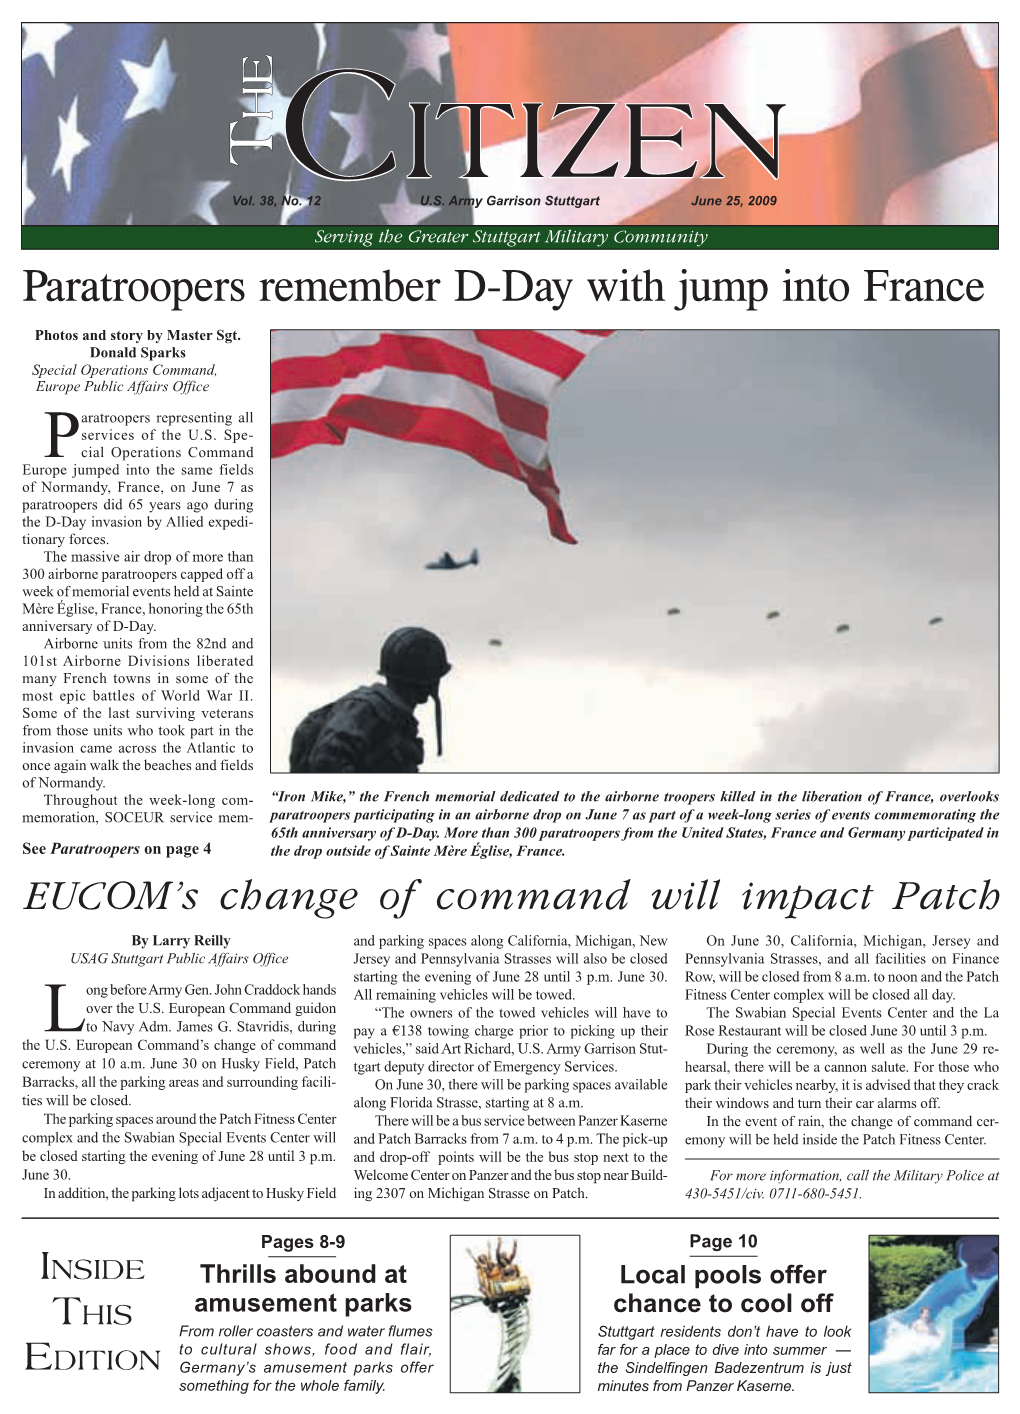 H E Paratroopers Remember D-Day with Jump Into France